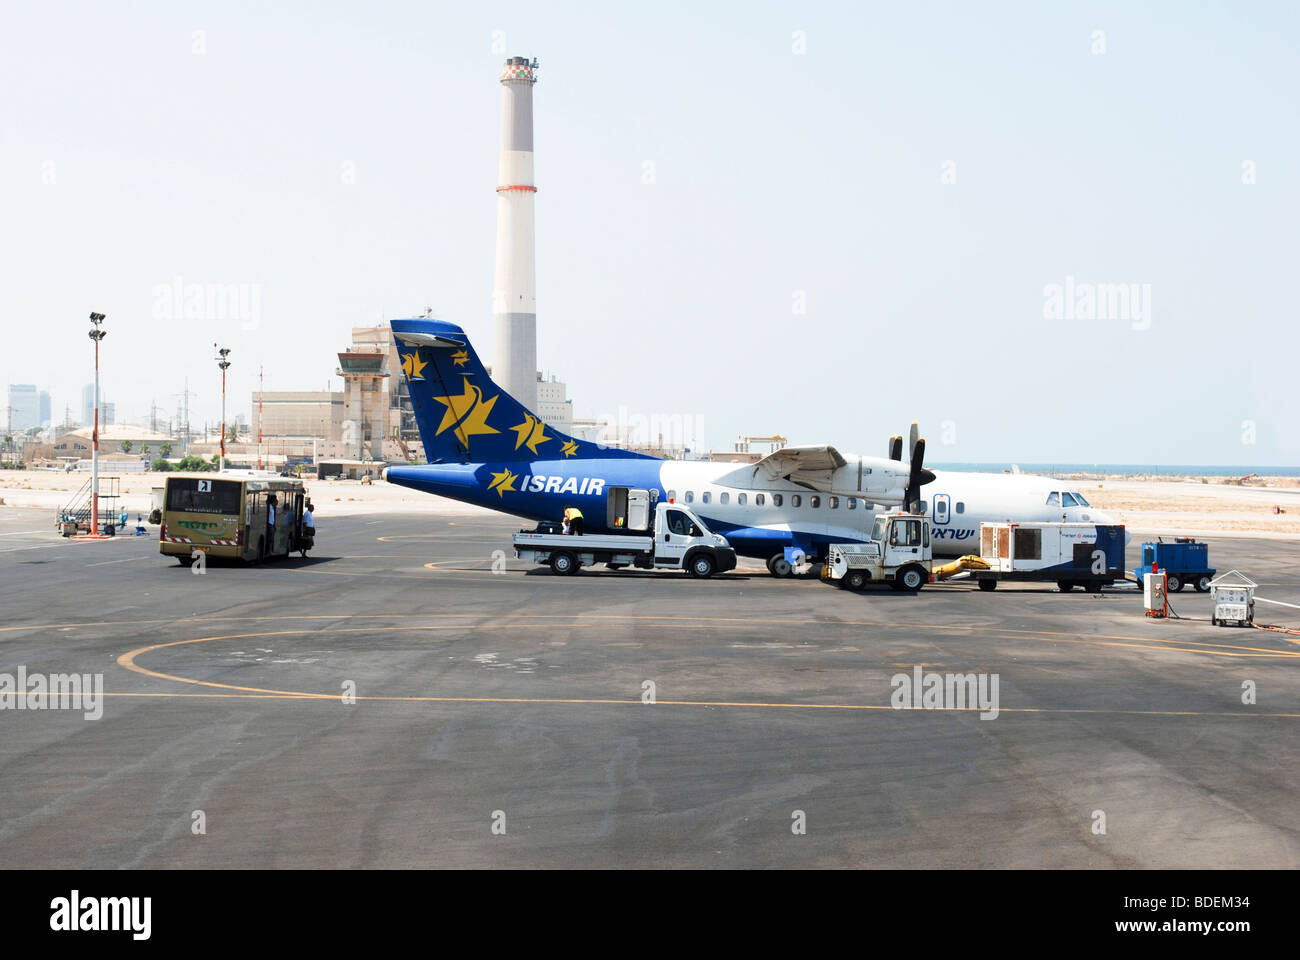 Israel, Tel Aviv, An Israir airlines passenger plane at the Sde Dov domestic airport Stock Photo